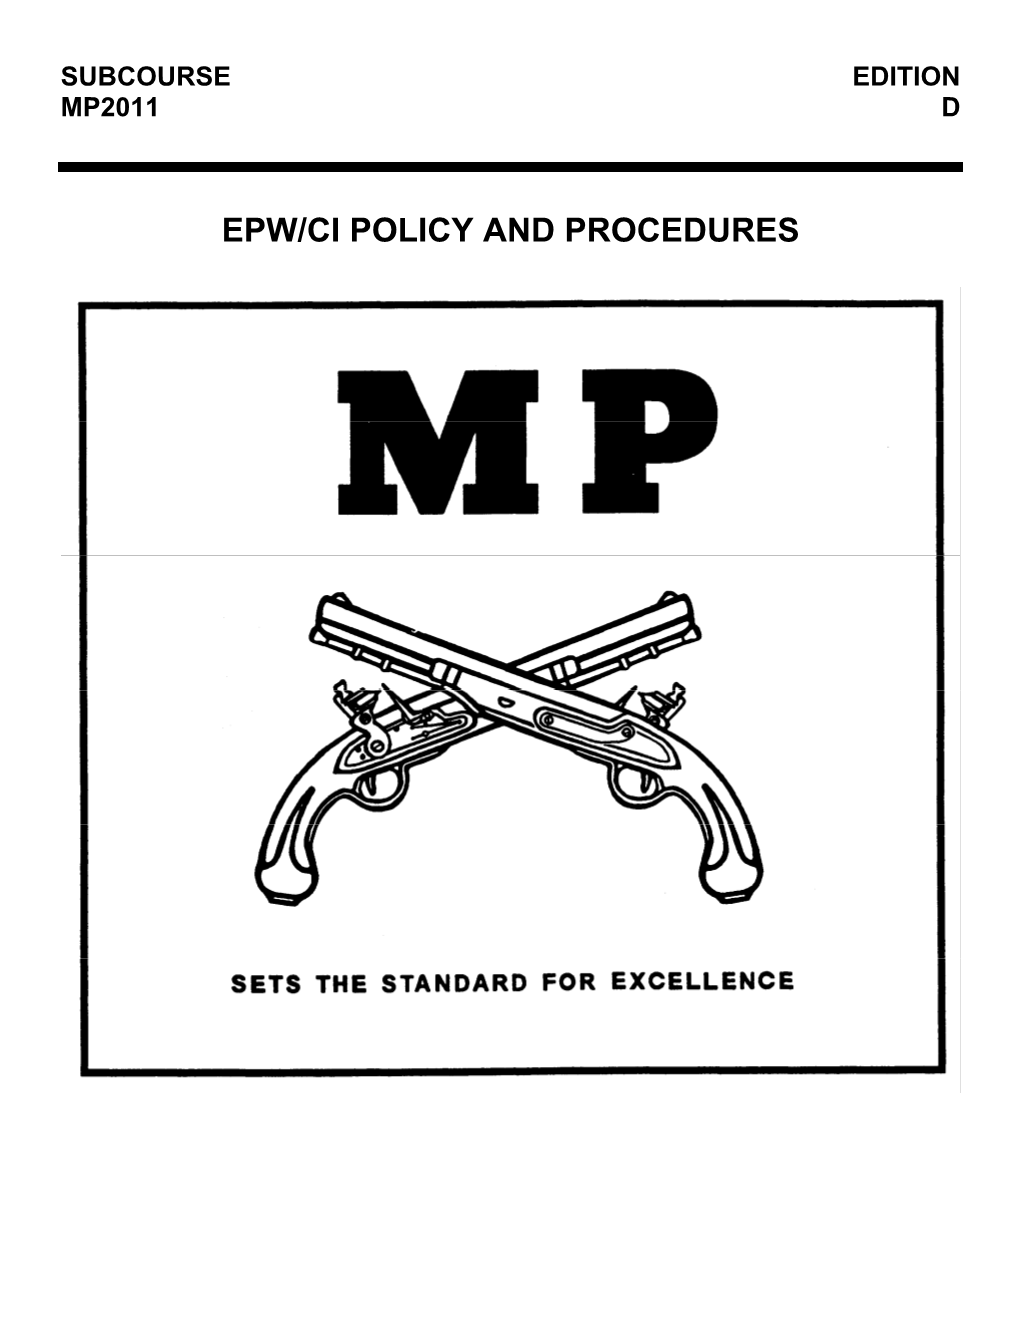 Epw/Ci Policy and Procedures